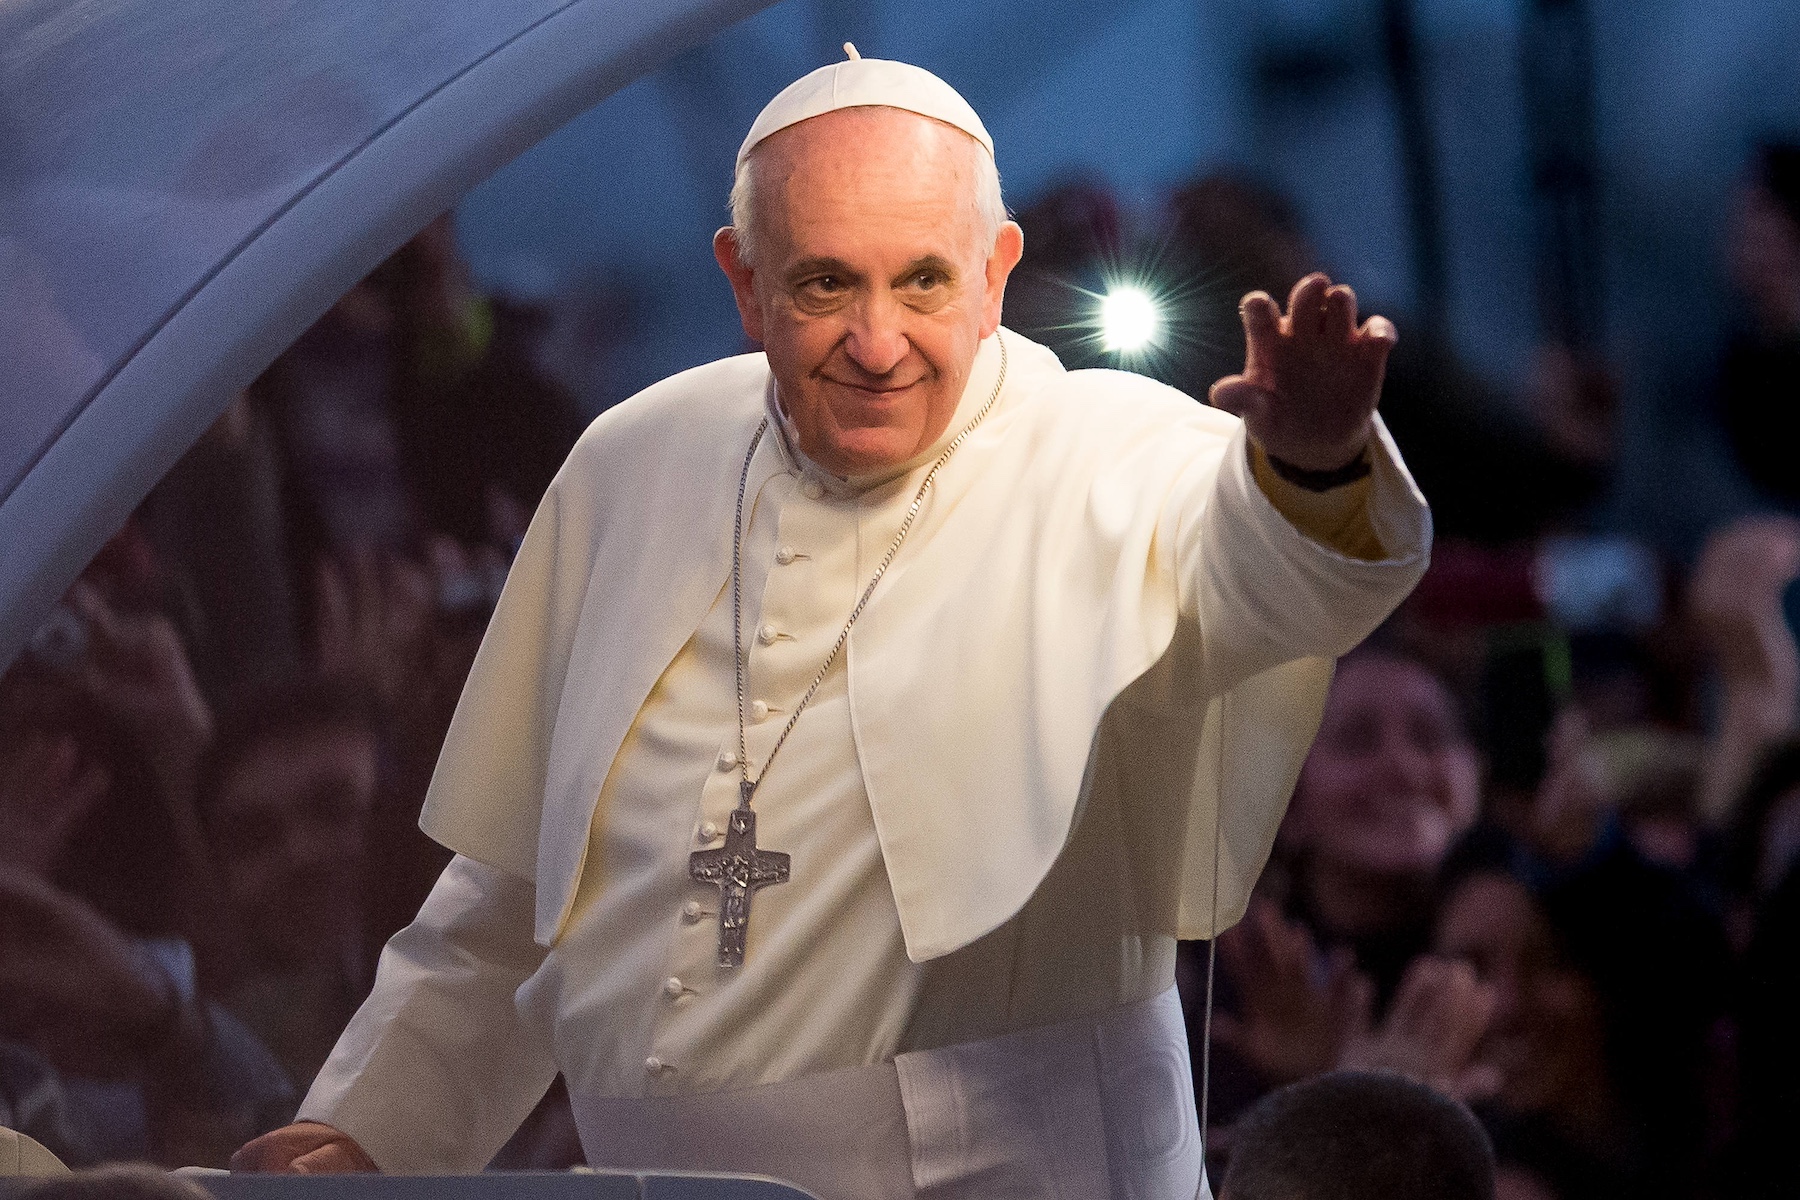 In A Landmark Moment, Pope Francis Has Said Catholic Priests Can Bless Same-Sex Couples